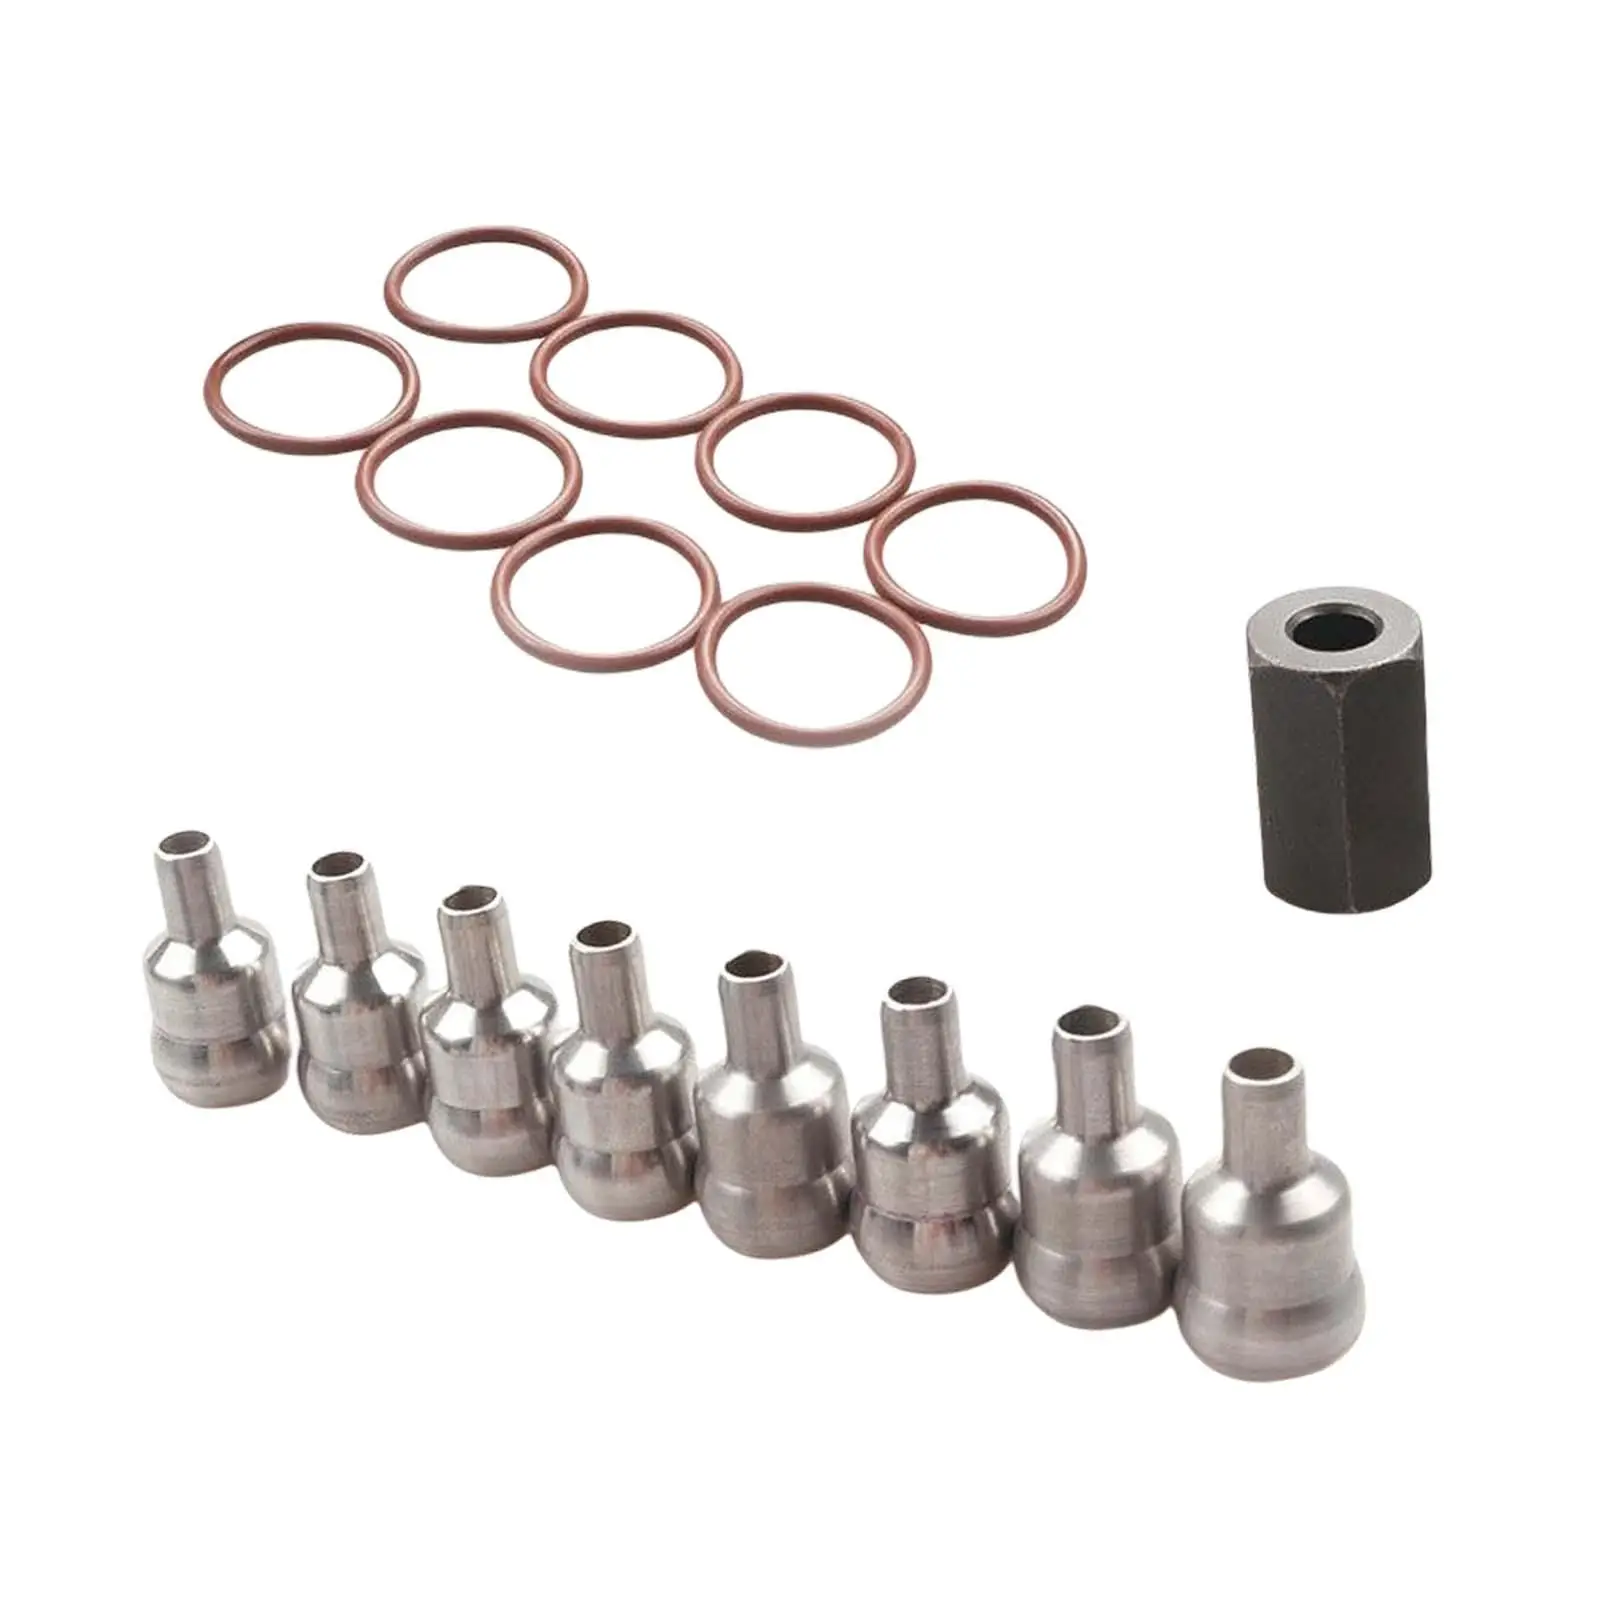 Car High Pressure Oil Rail Ball Tube Repair  to Install Spare Parts Replacement Professional Automotive Durable for  6.0